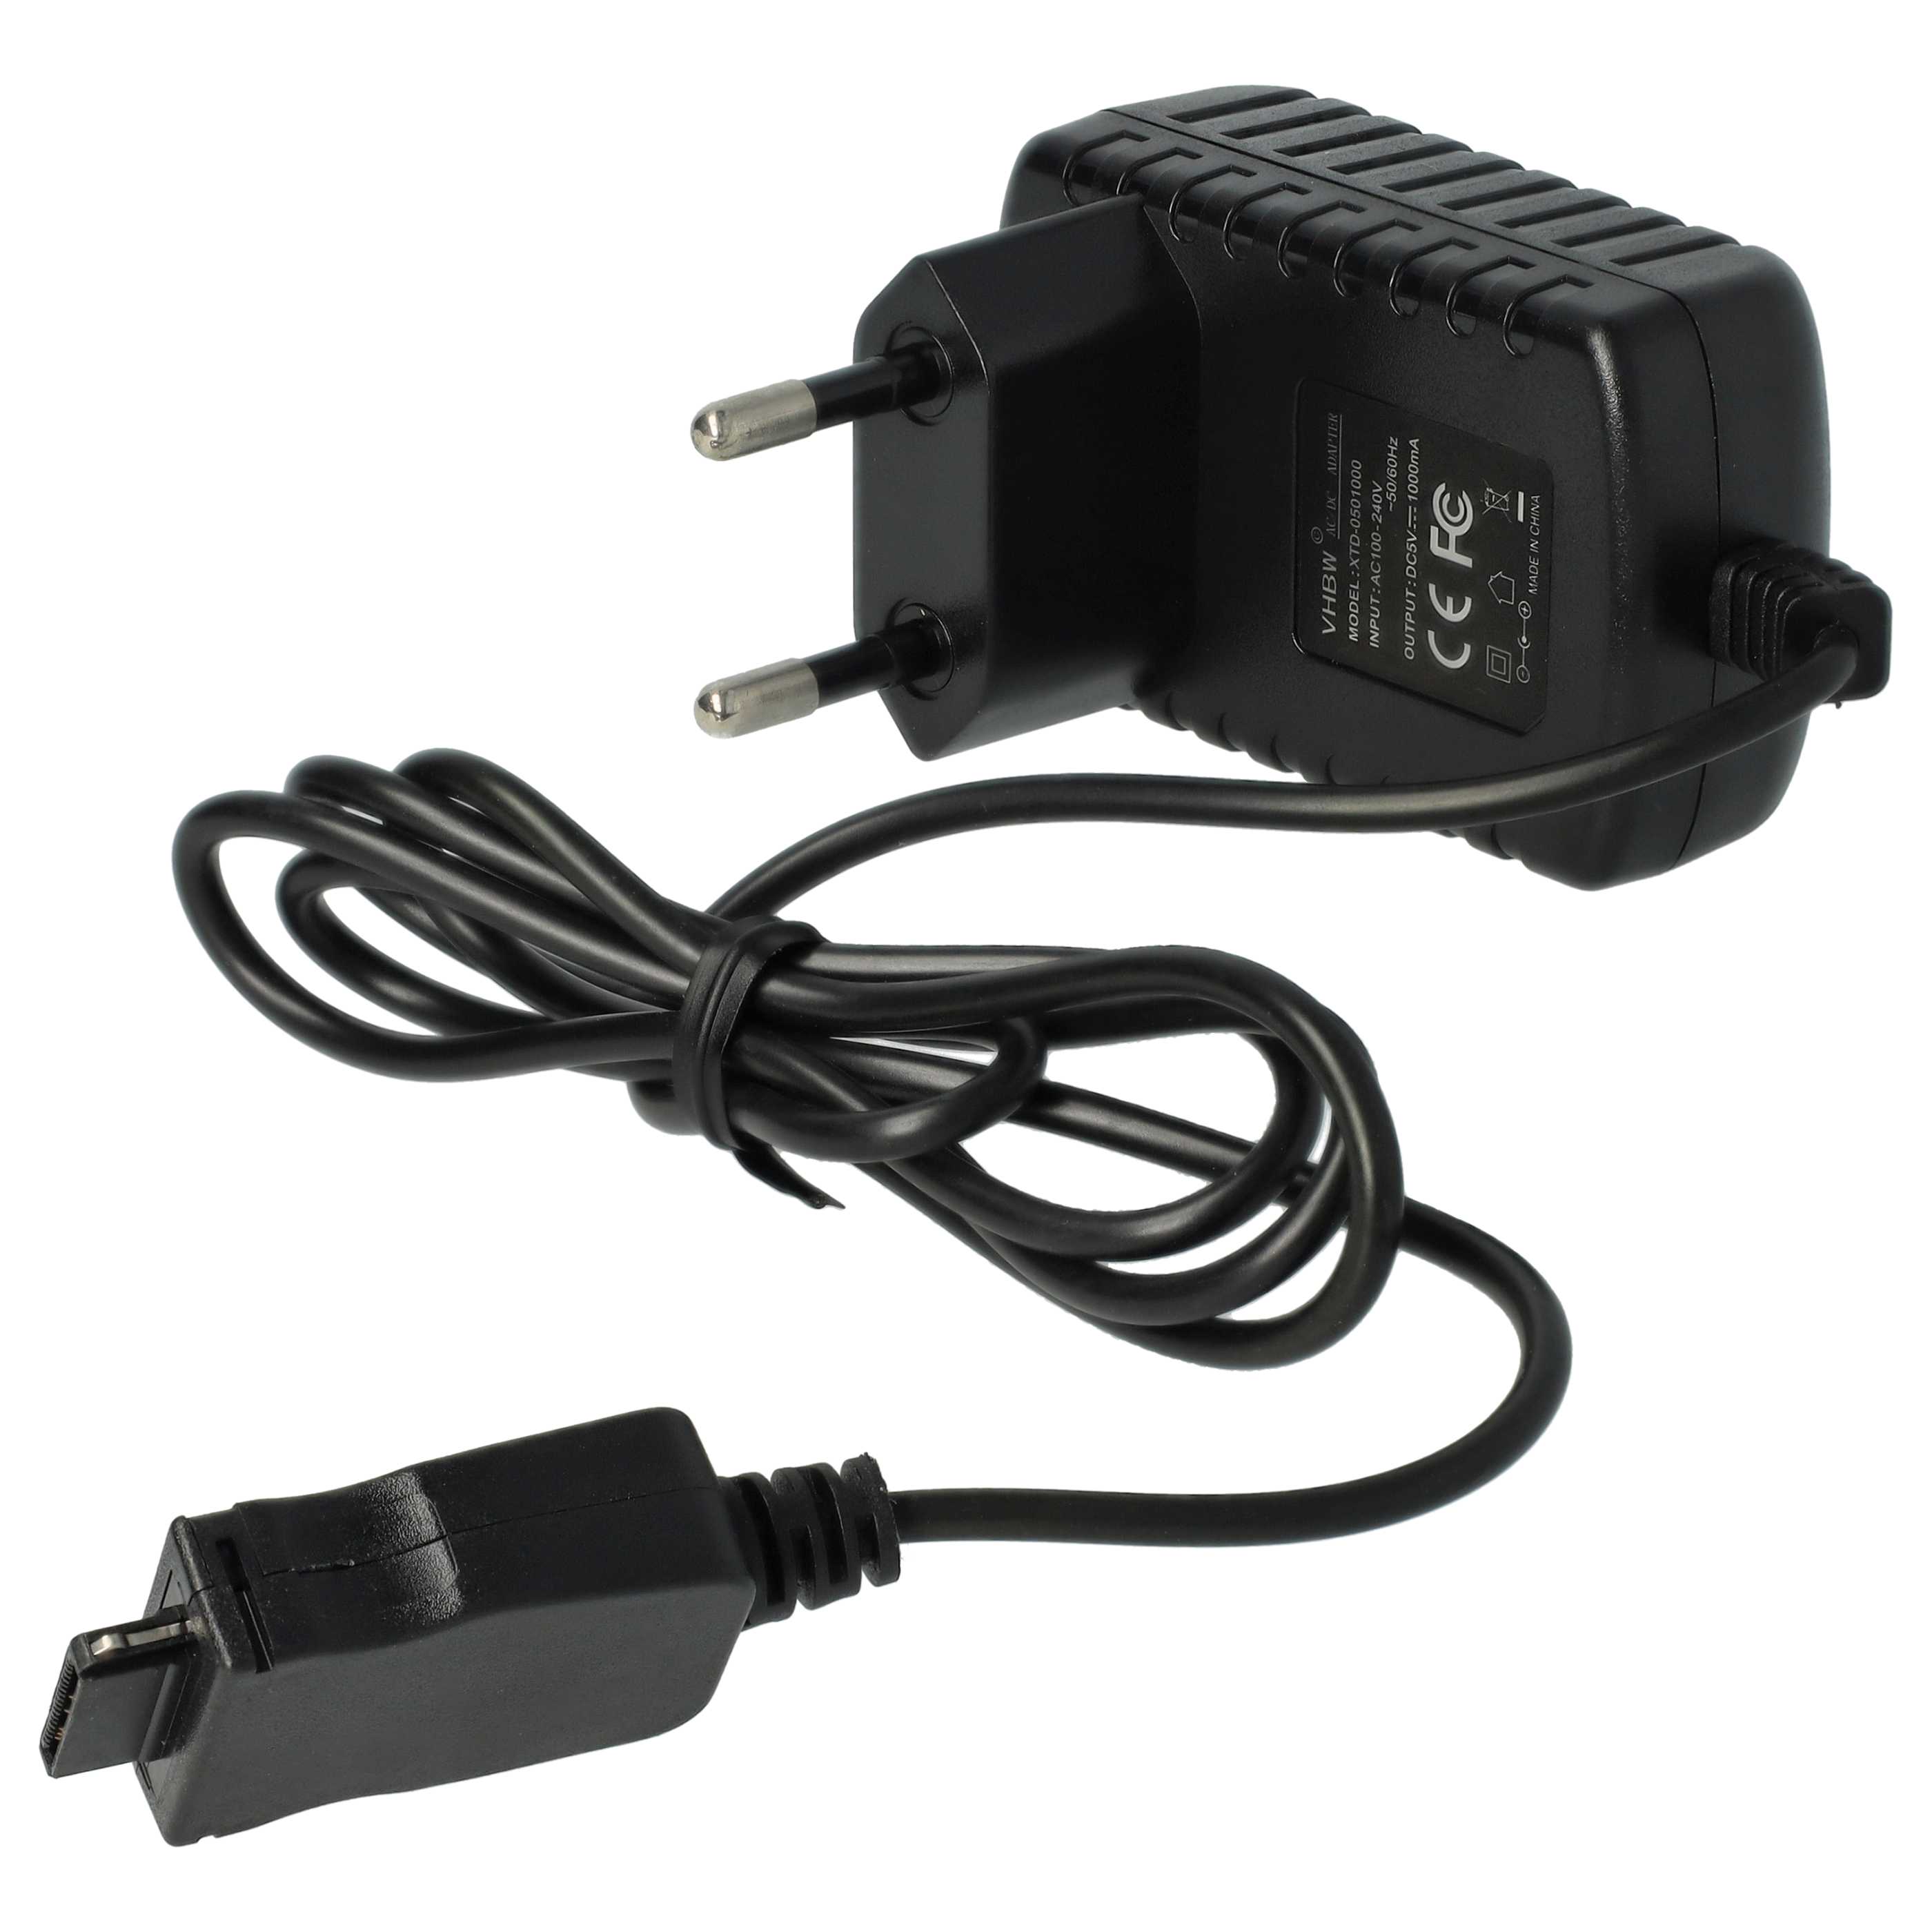 Charger 110-220 V for Anycool, Samsung D66Mobile Phone etc.